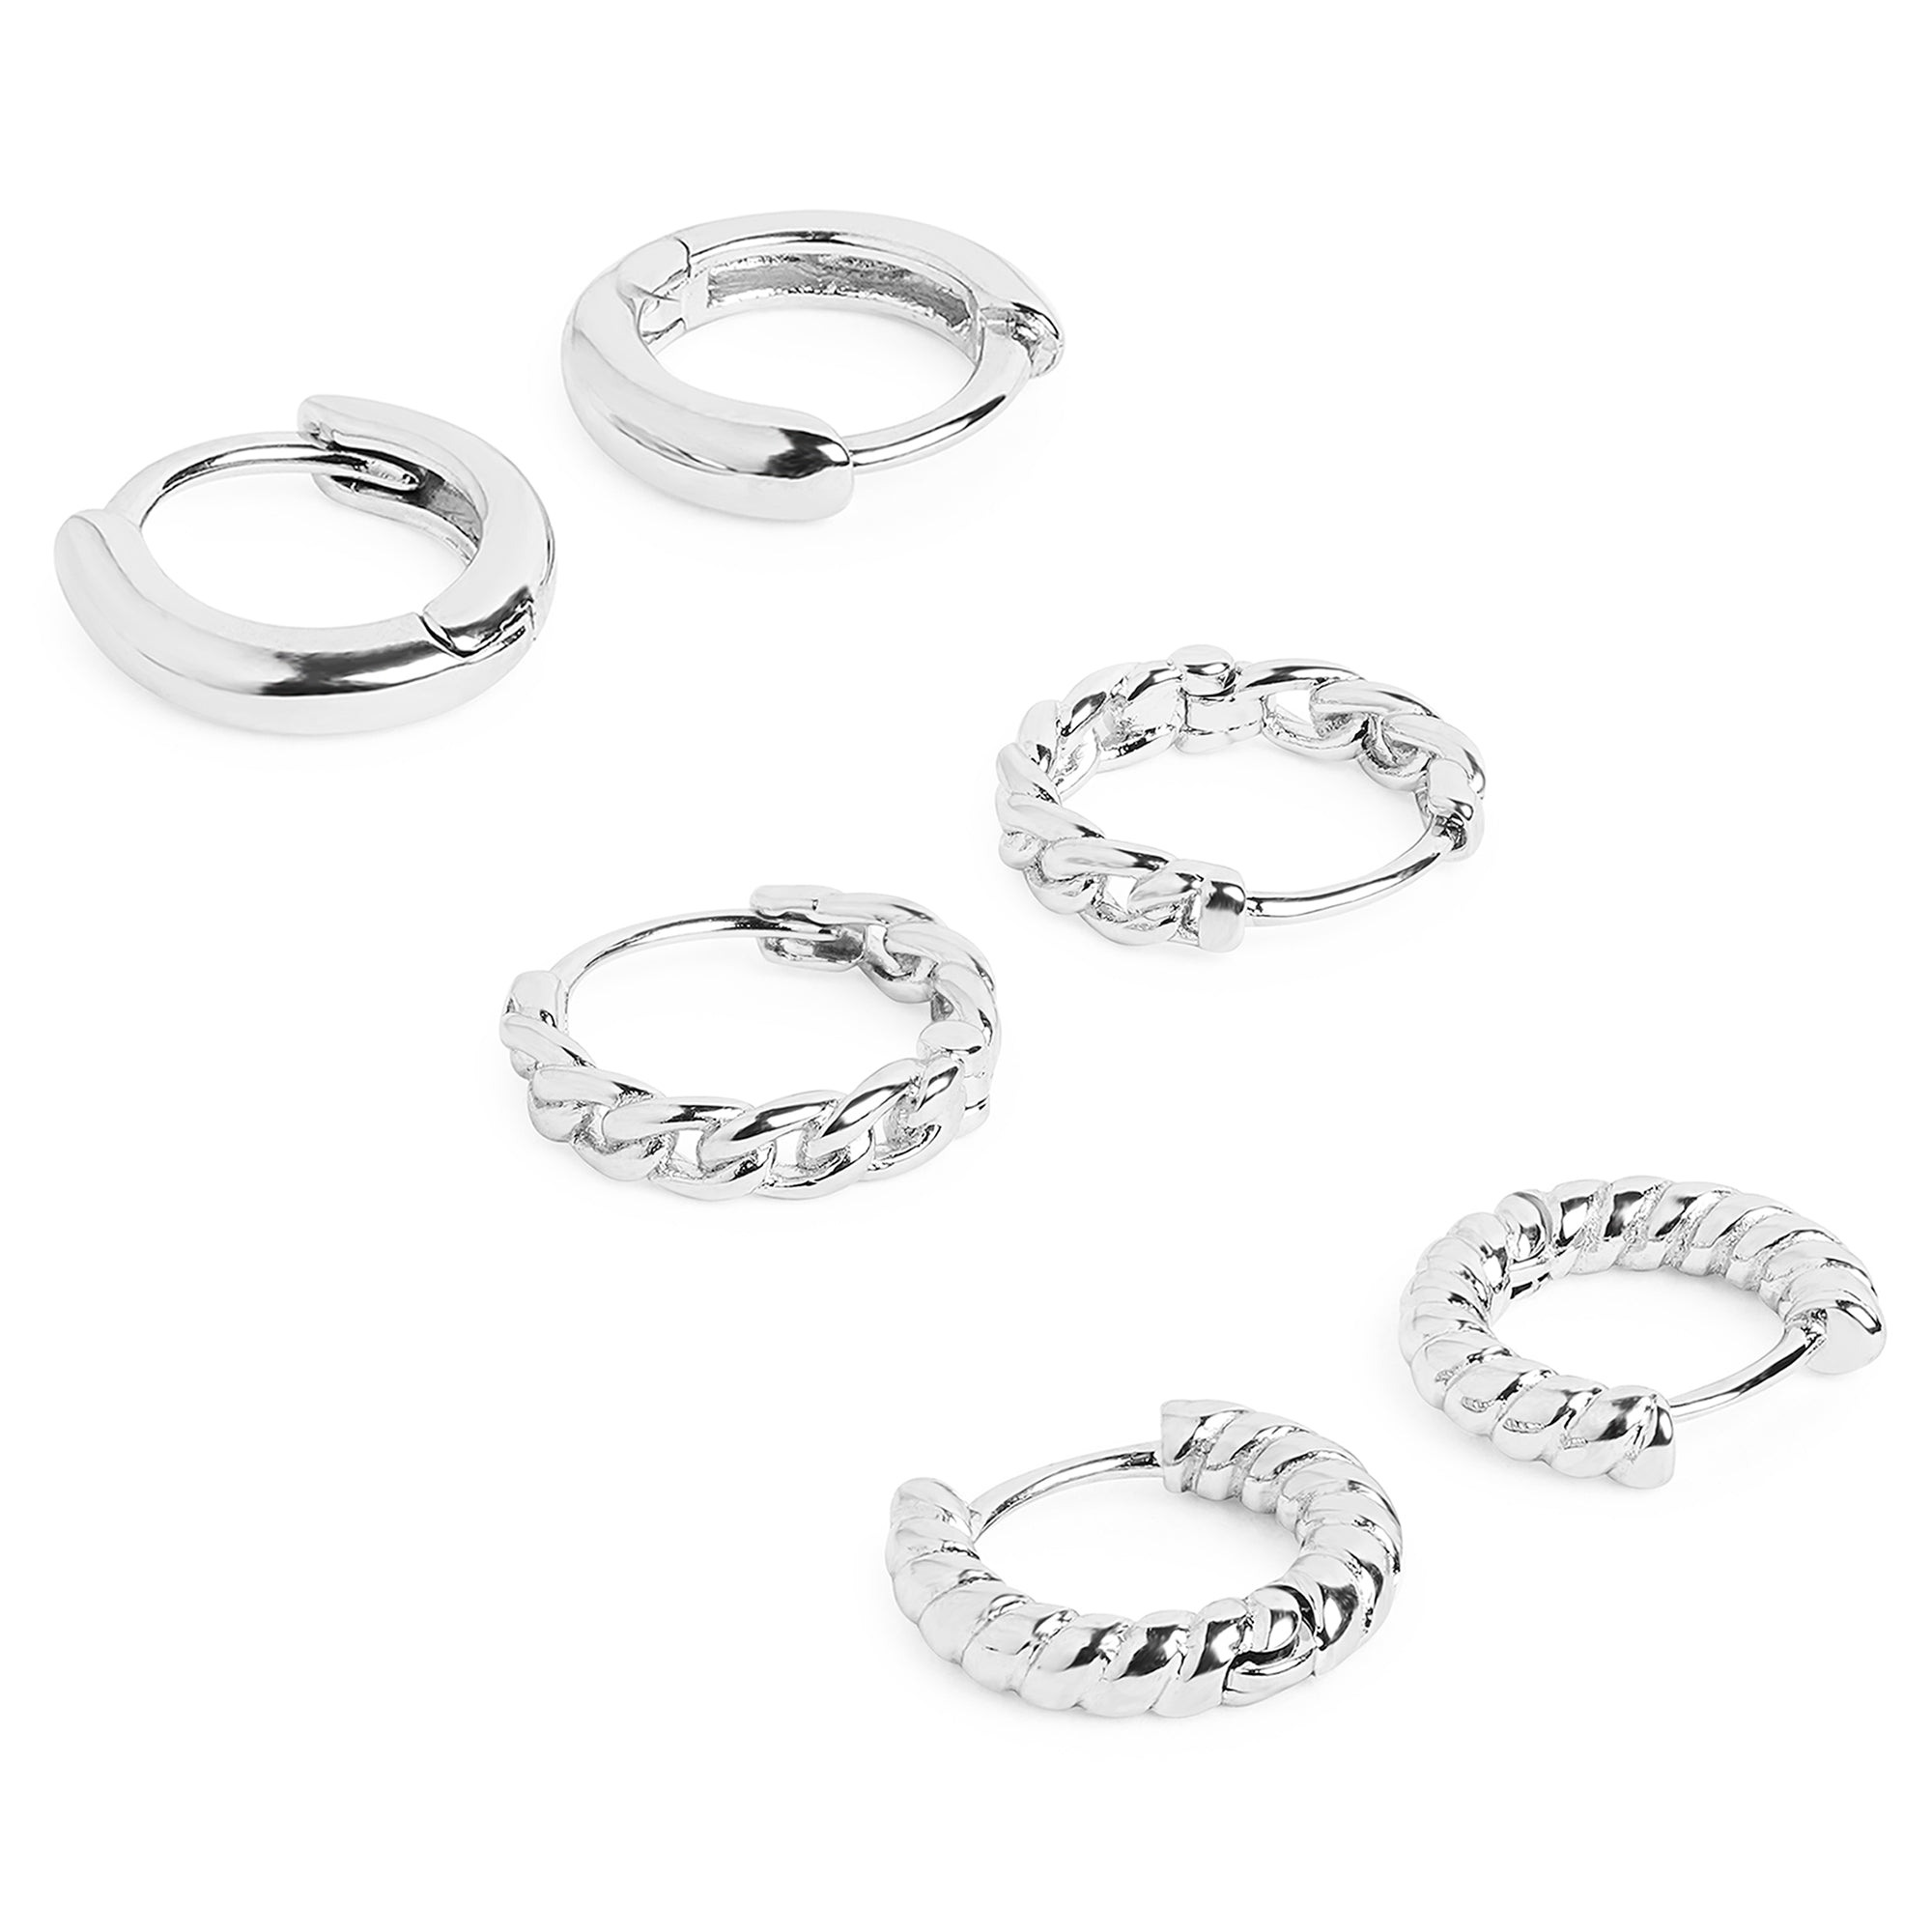 Real Platinum- Plated Silver Z Platinum-Plated Twisted Hoops Earrings Set Of 3